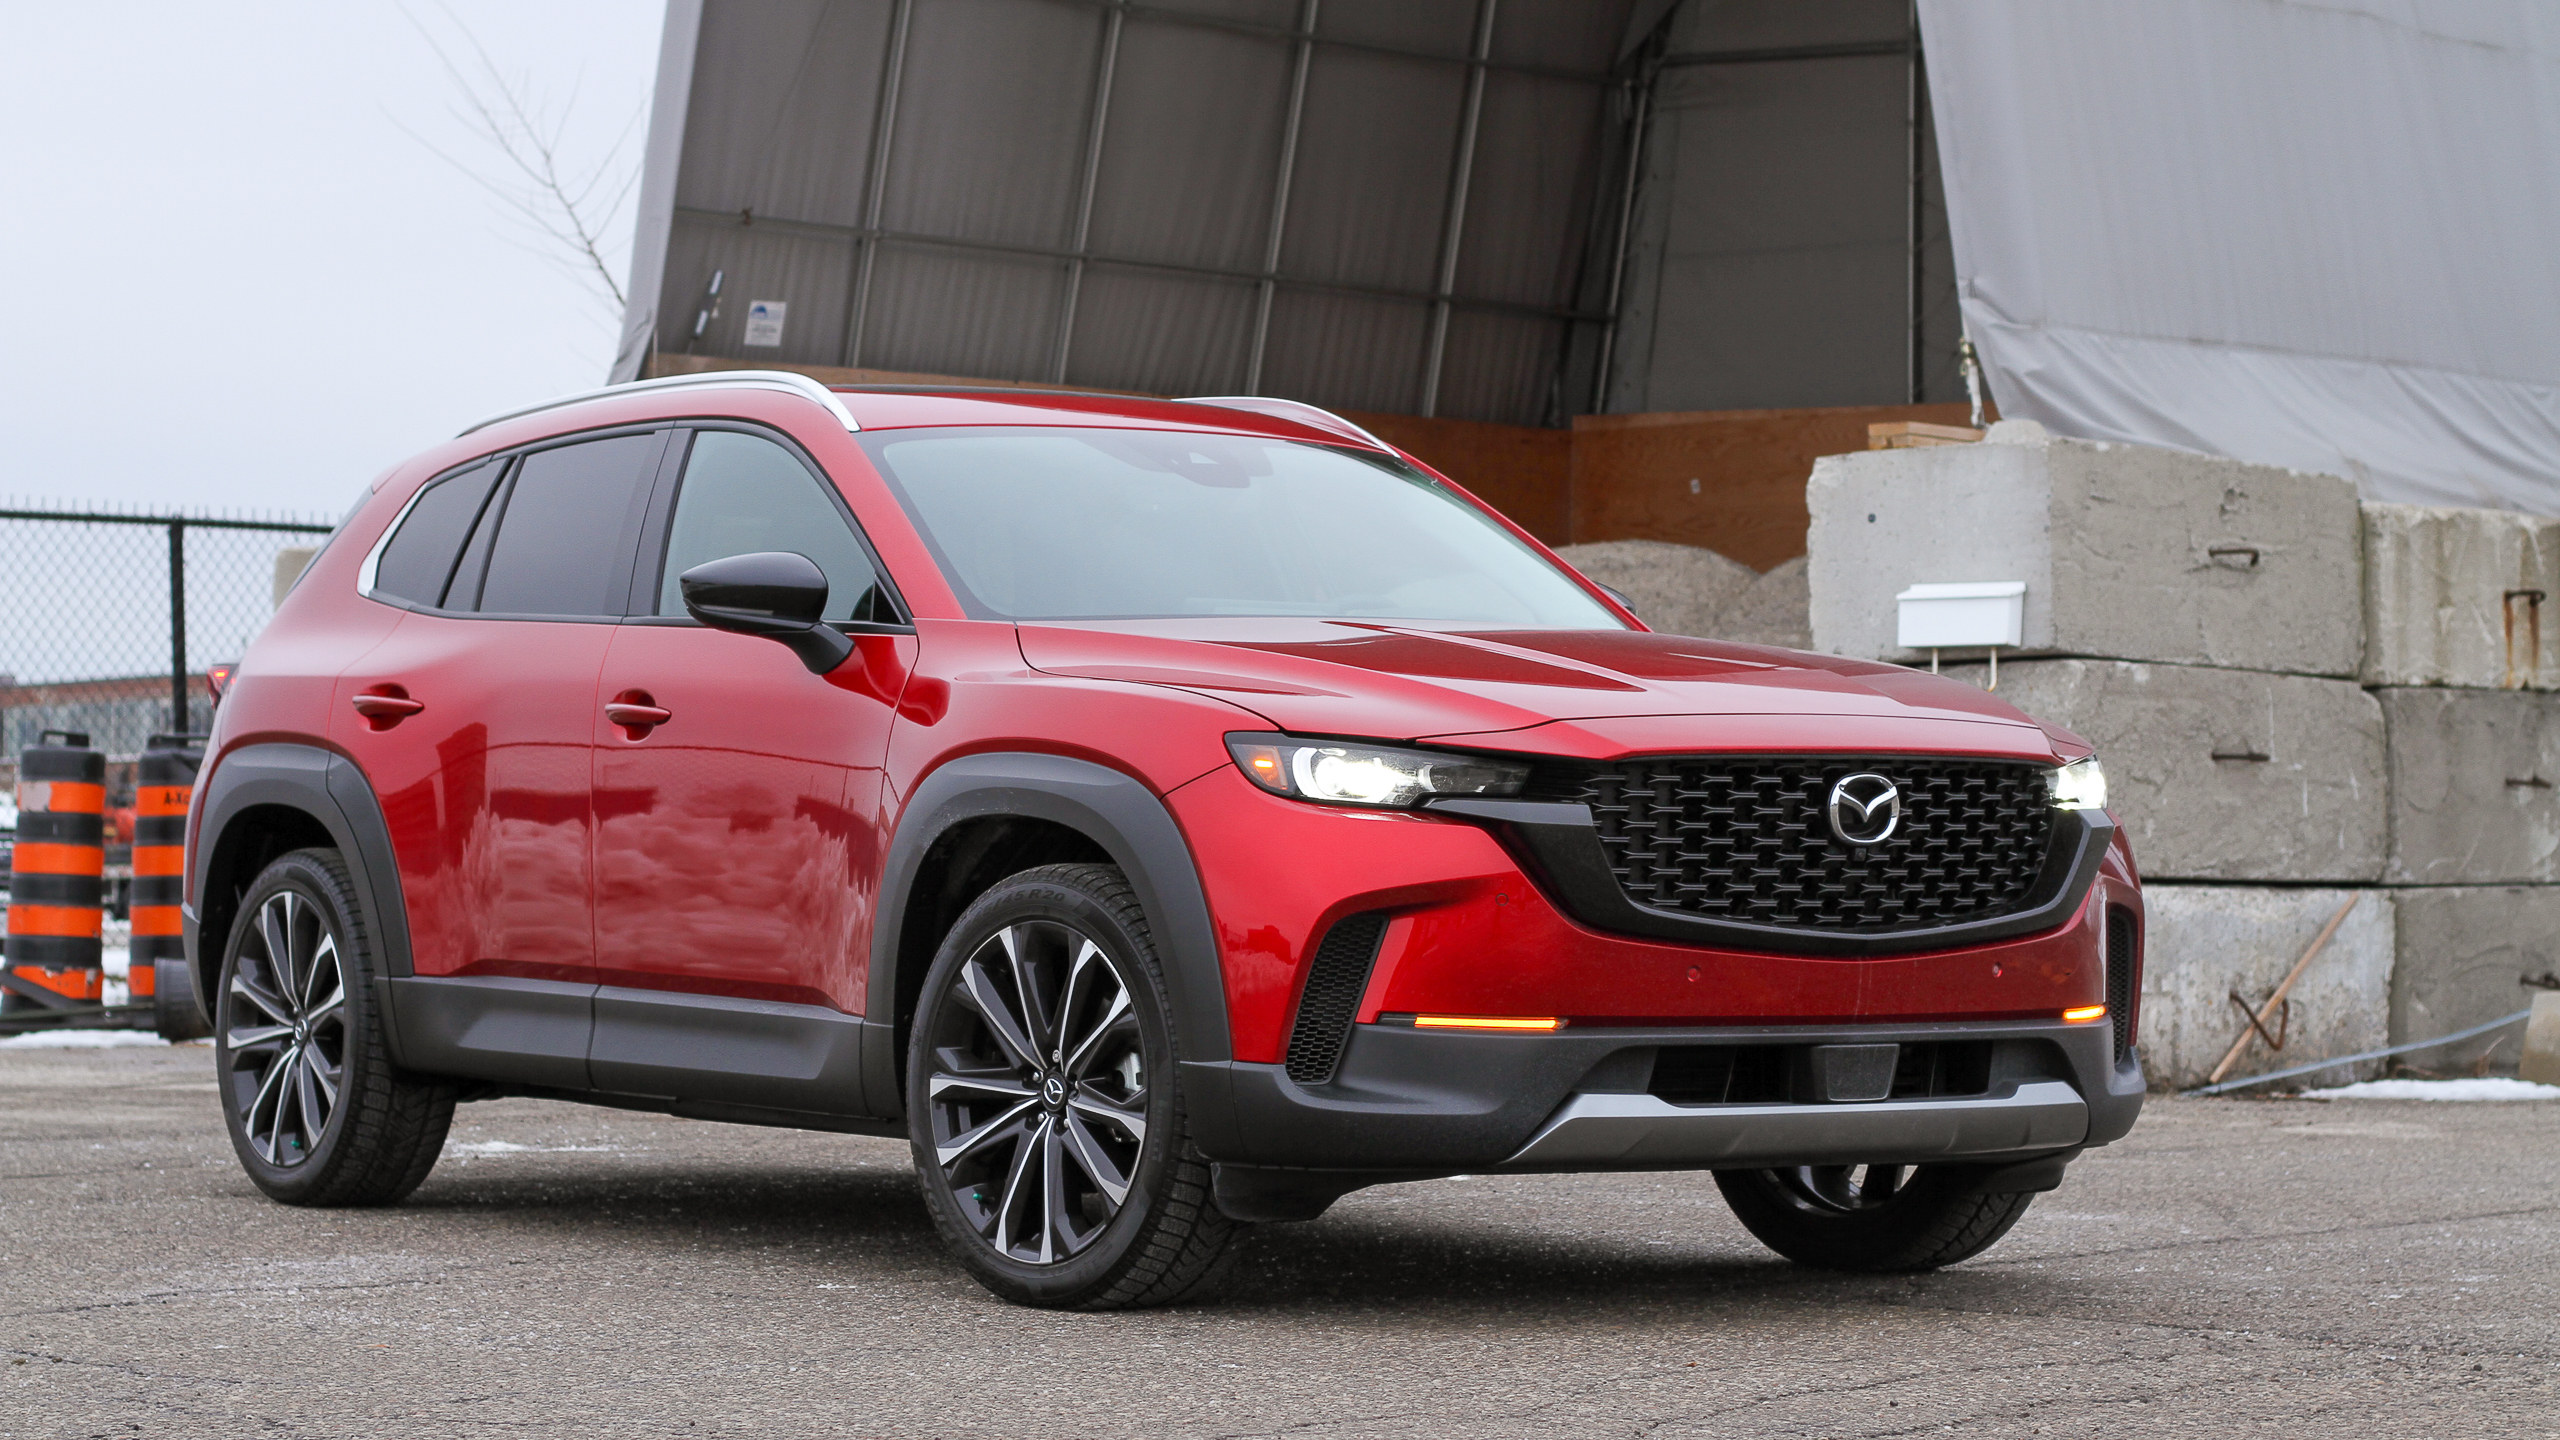 2023 Mazda CX-5 Turbo review: Great, but not for everyone